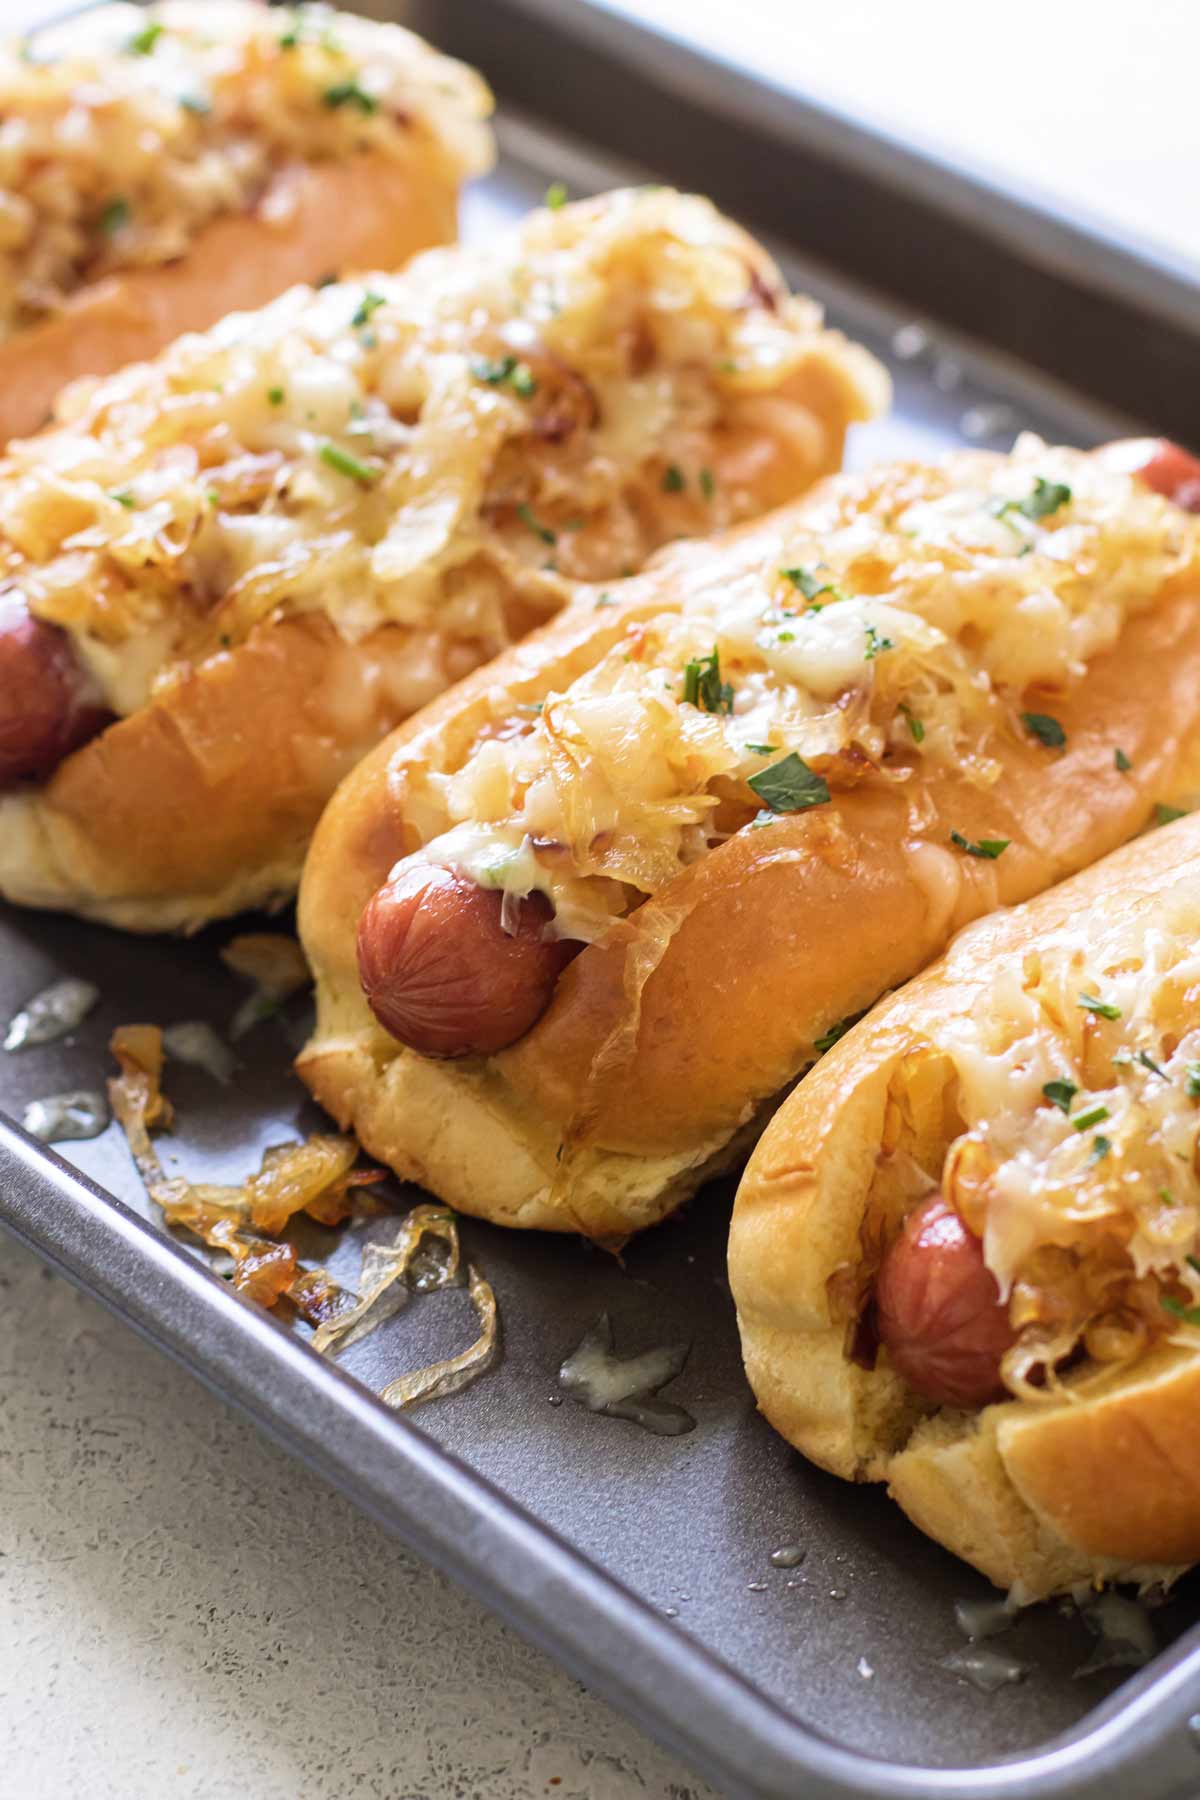 photo of hot dogs with cheese and caramelized onions